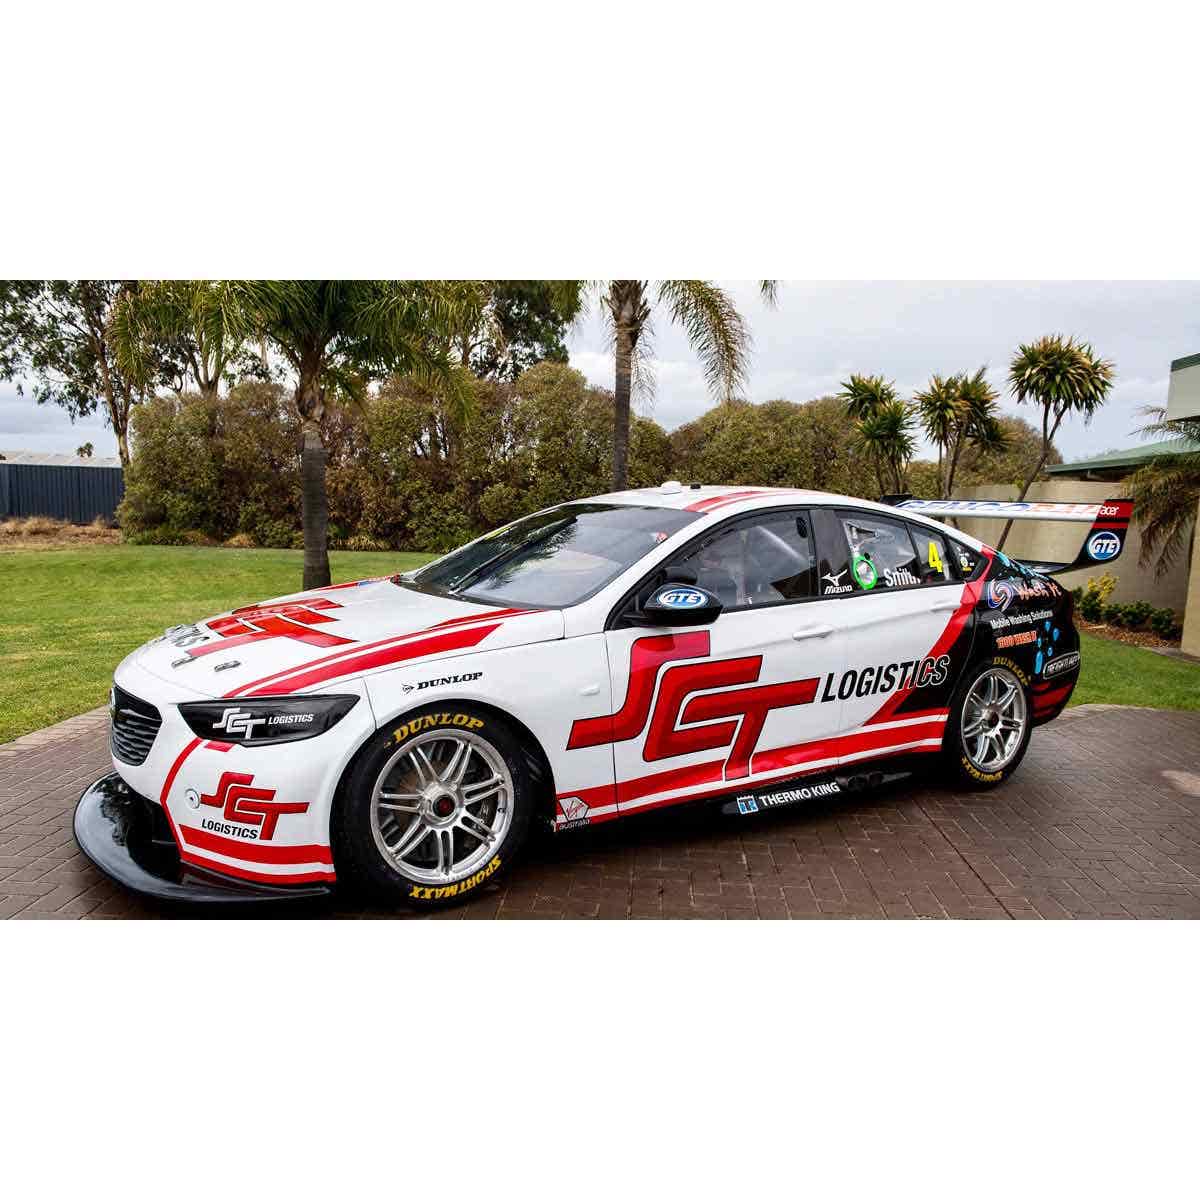 HOLDEN ZB COMMODORE - BJR SCT LOGISTICS - JACK SMITH #4 - 2021 Mount Panorama 500 Race 1 - 1:43 Scale Diecast Model Car